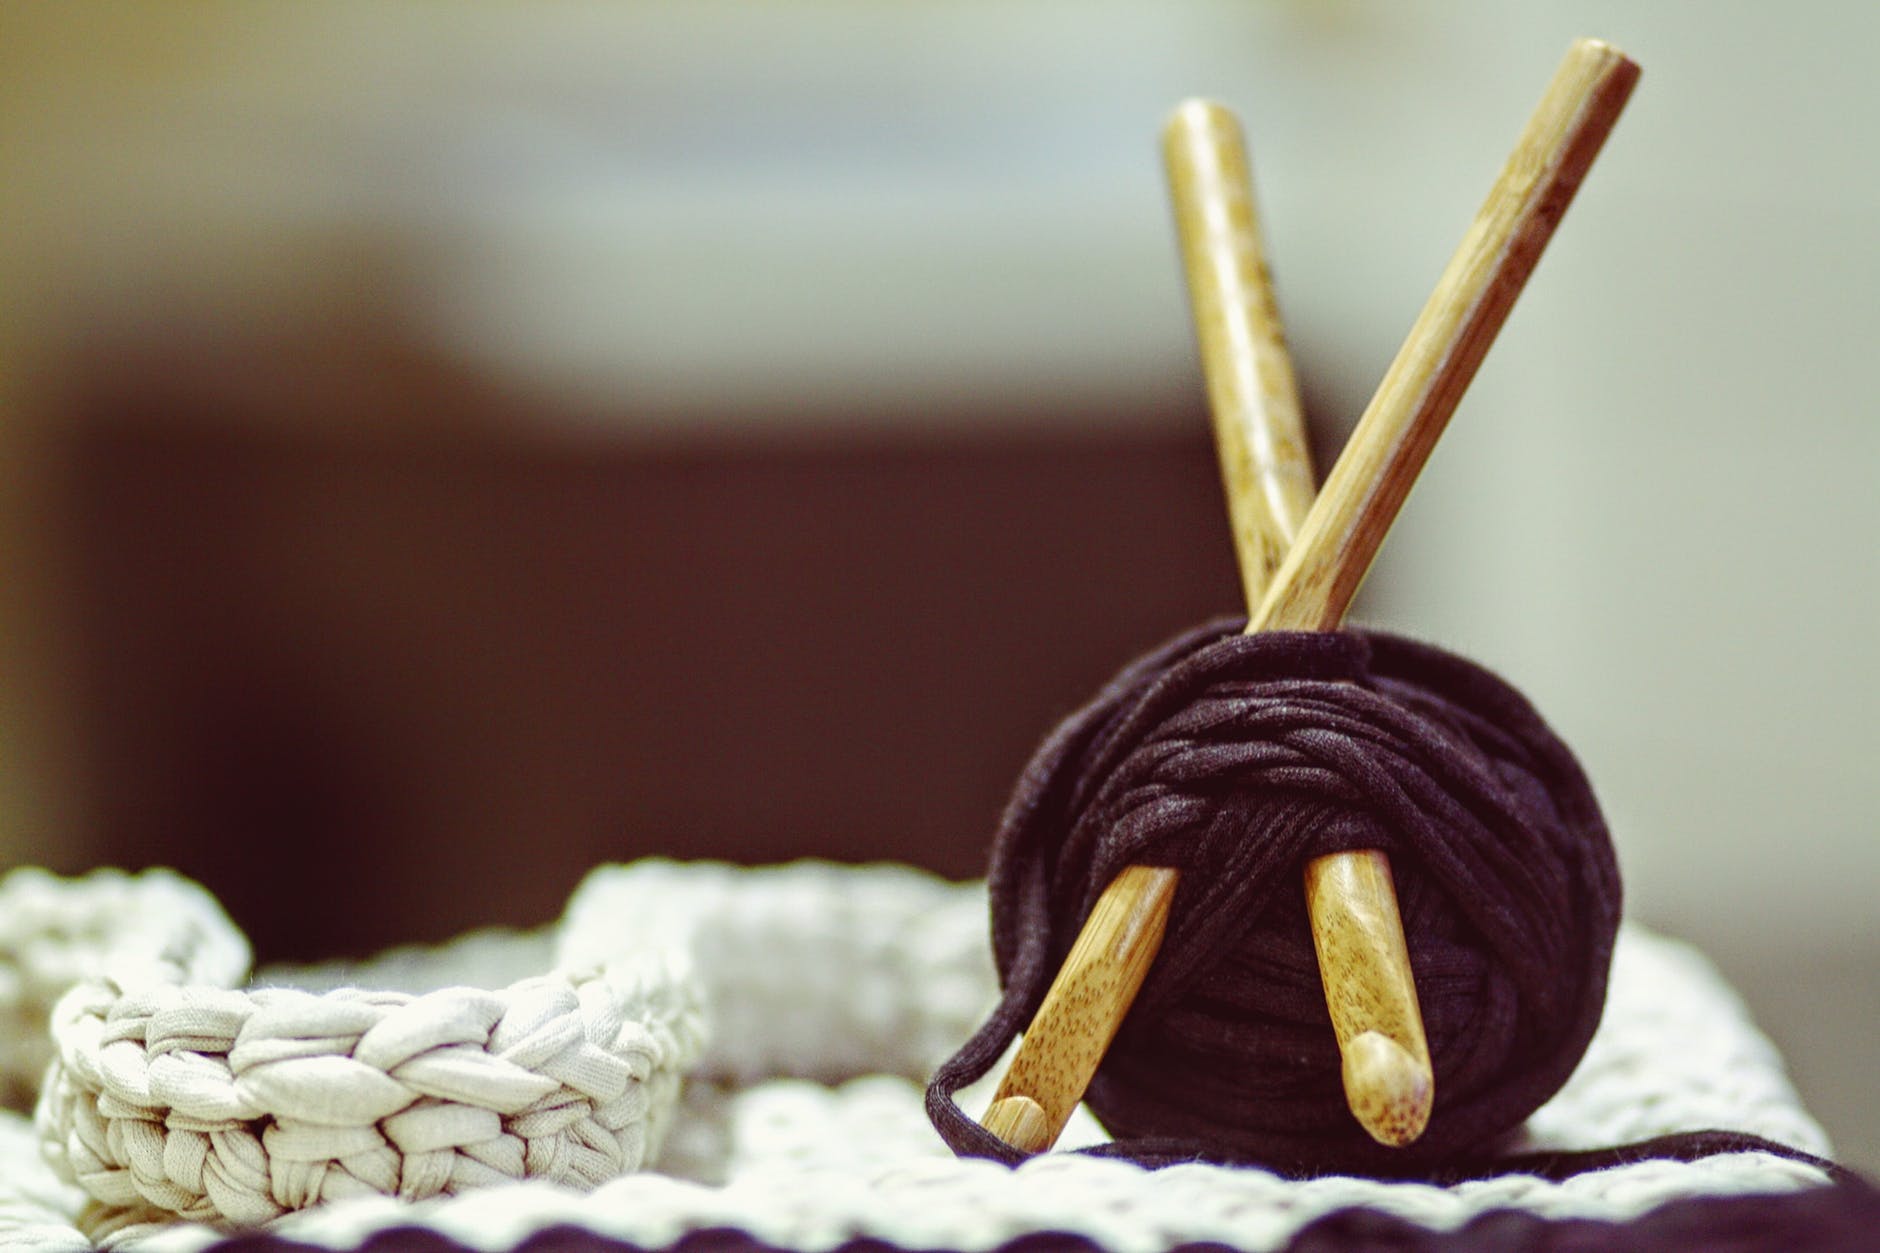 how to sell knitting online